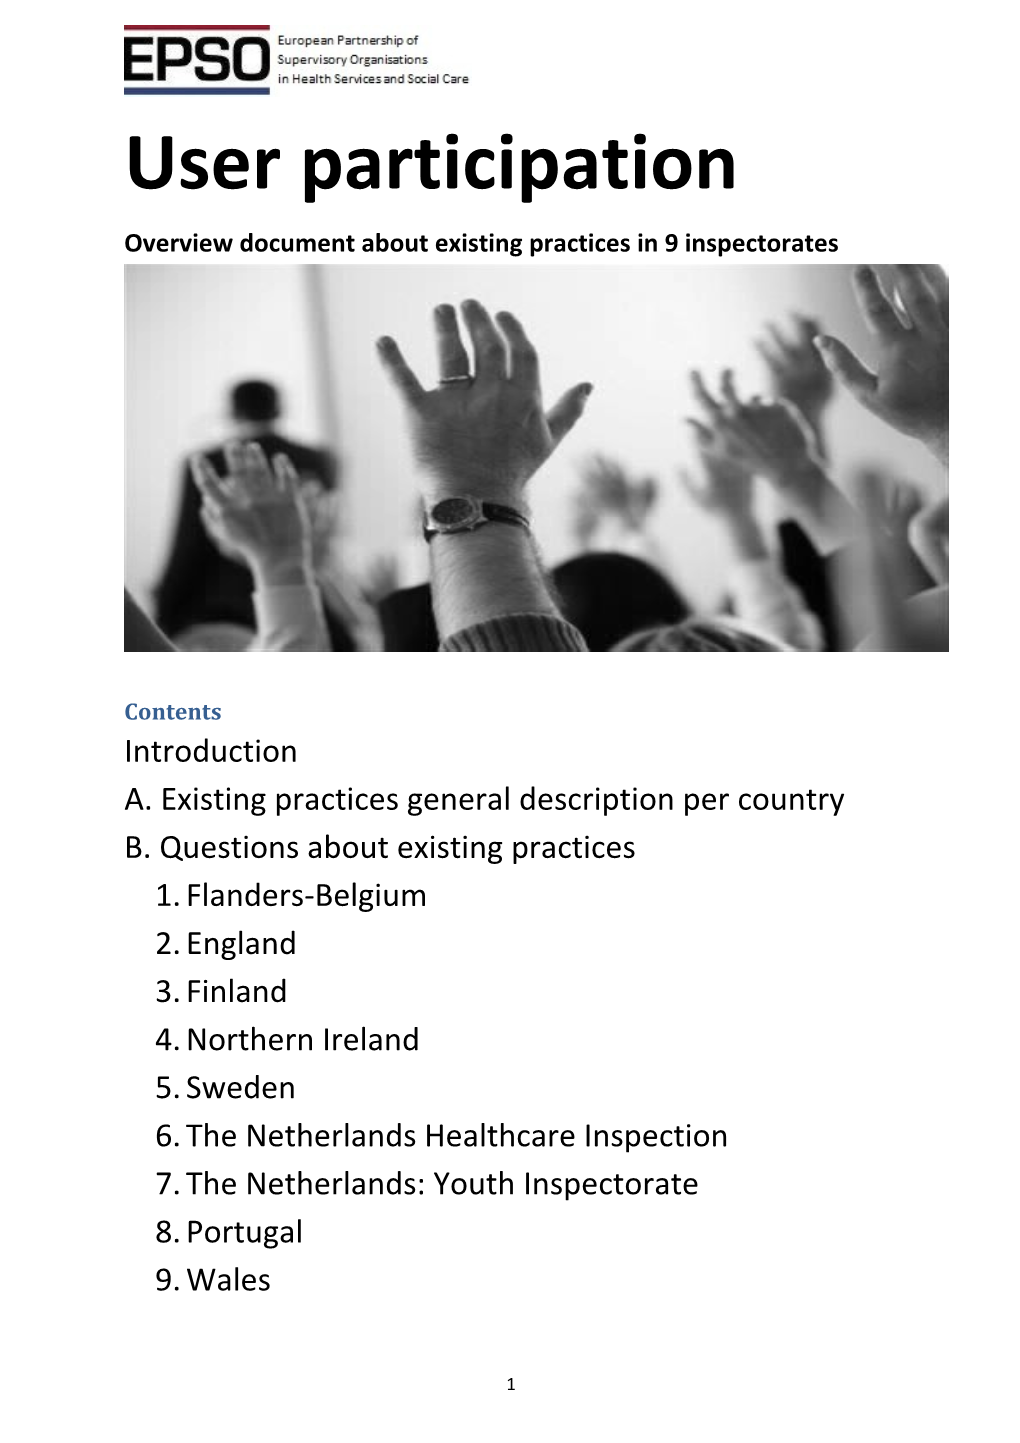 Overview Document About Existing Practicesin 9 Inspectorates